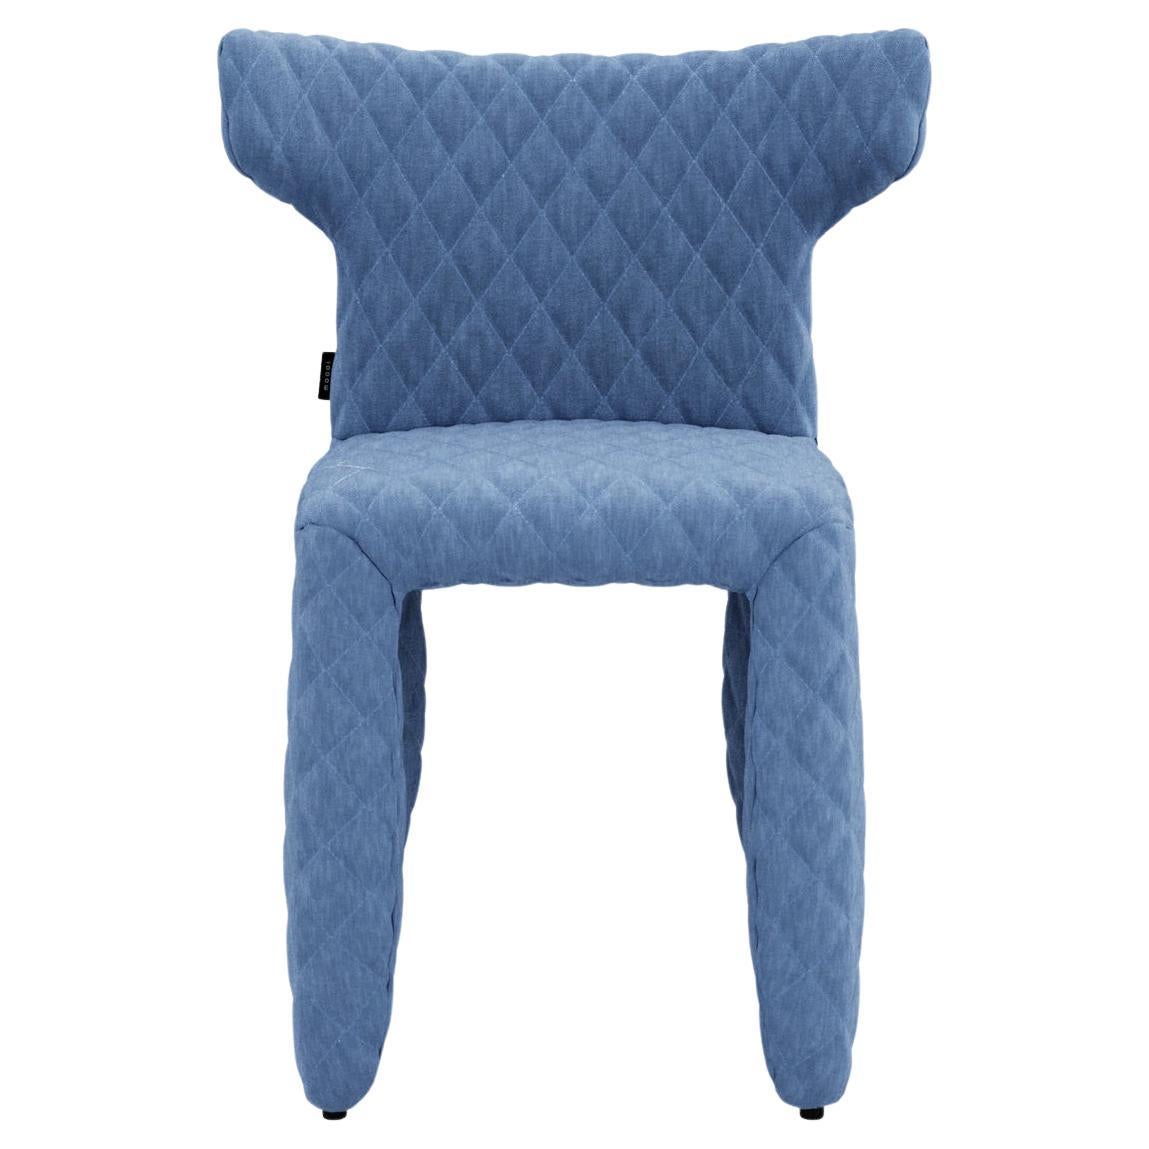 Moooi Monster Diamond Chair with Arms in Denim Light Wash Blue Upholstery For Sale